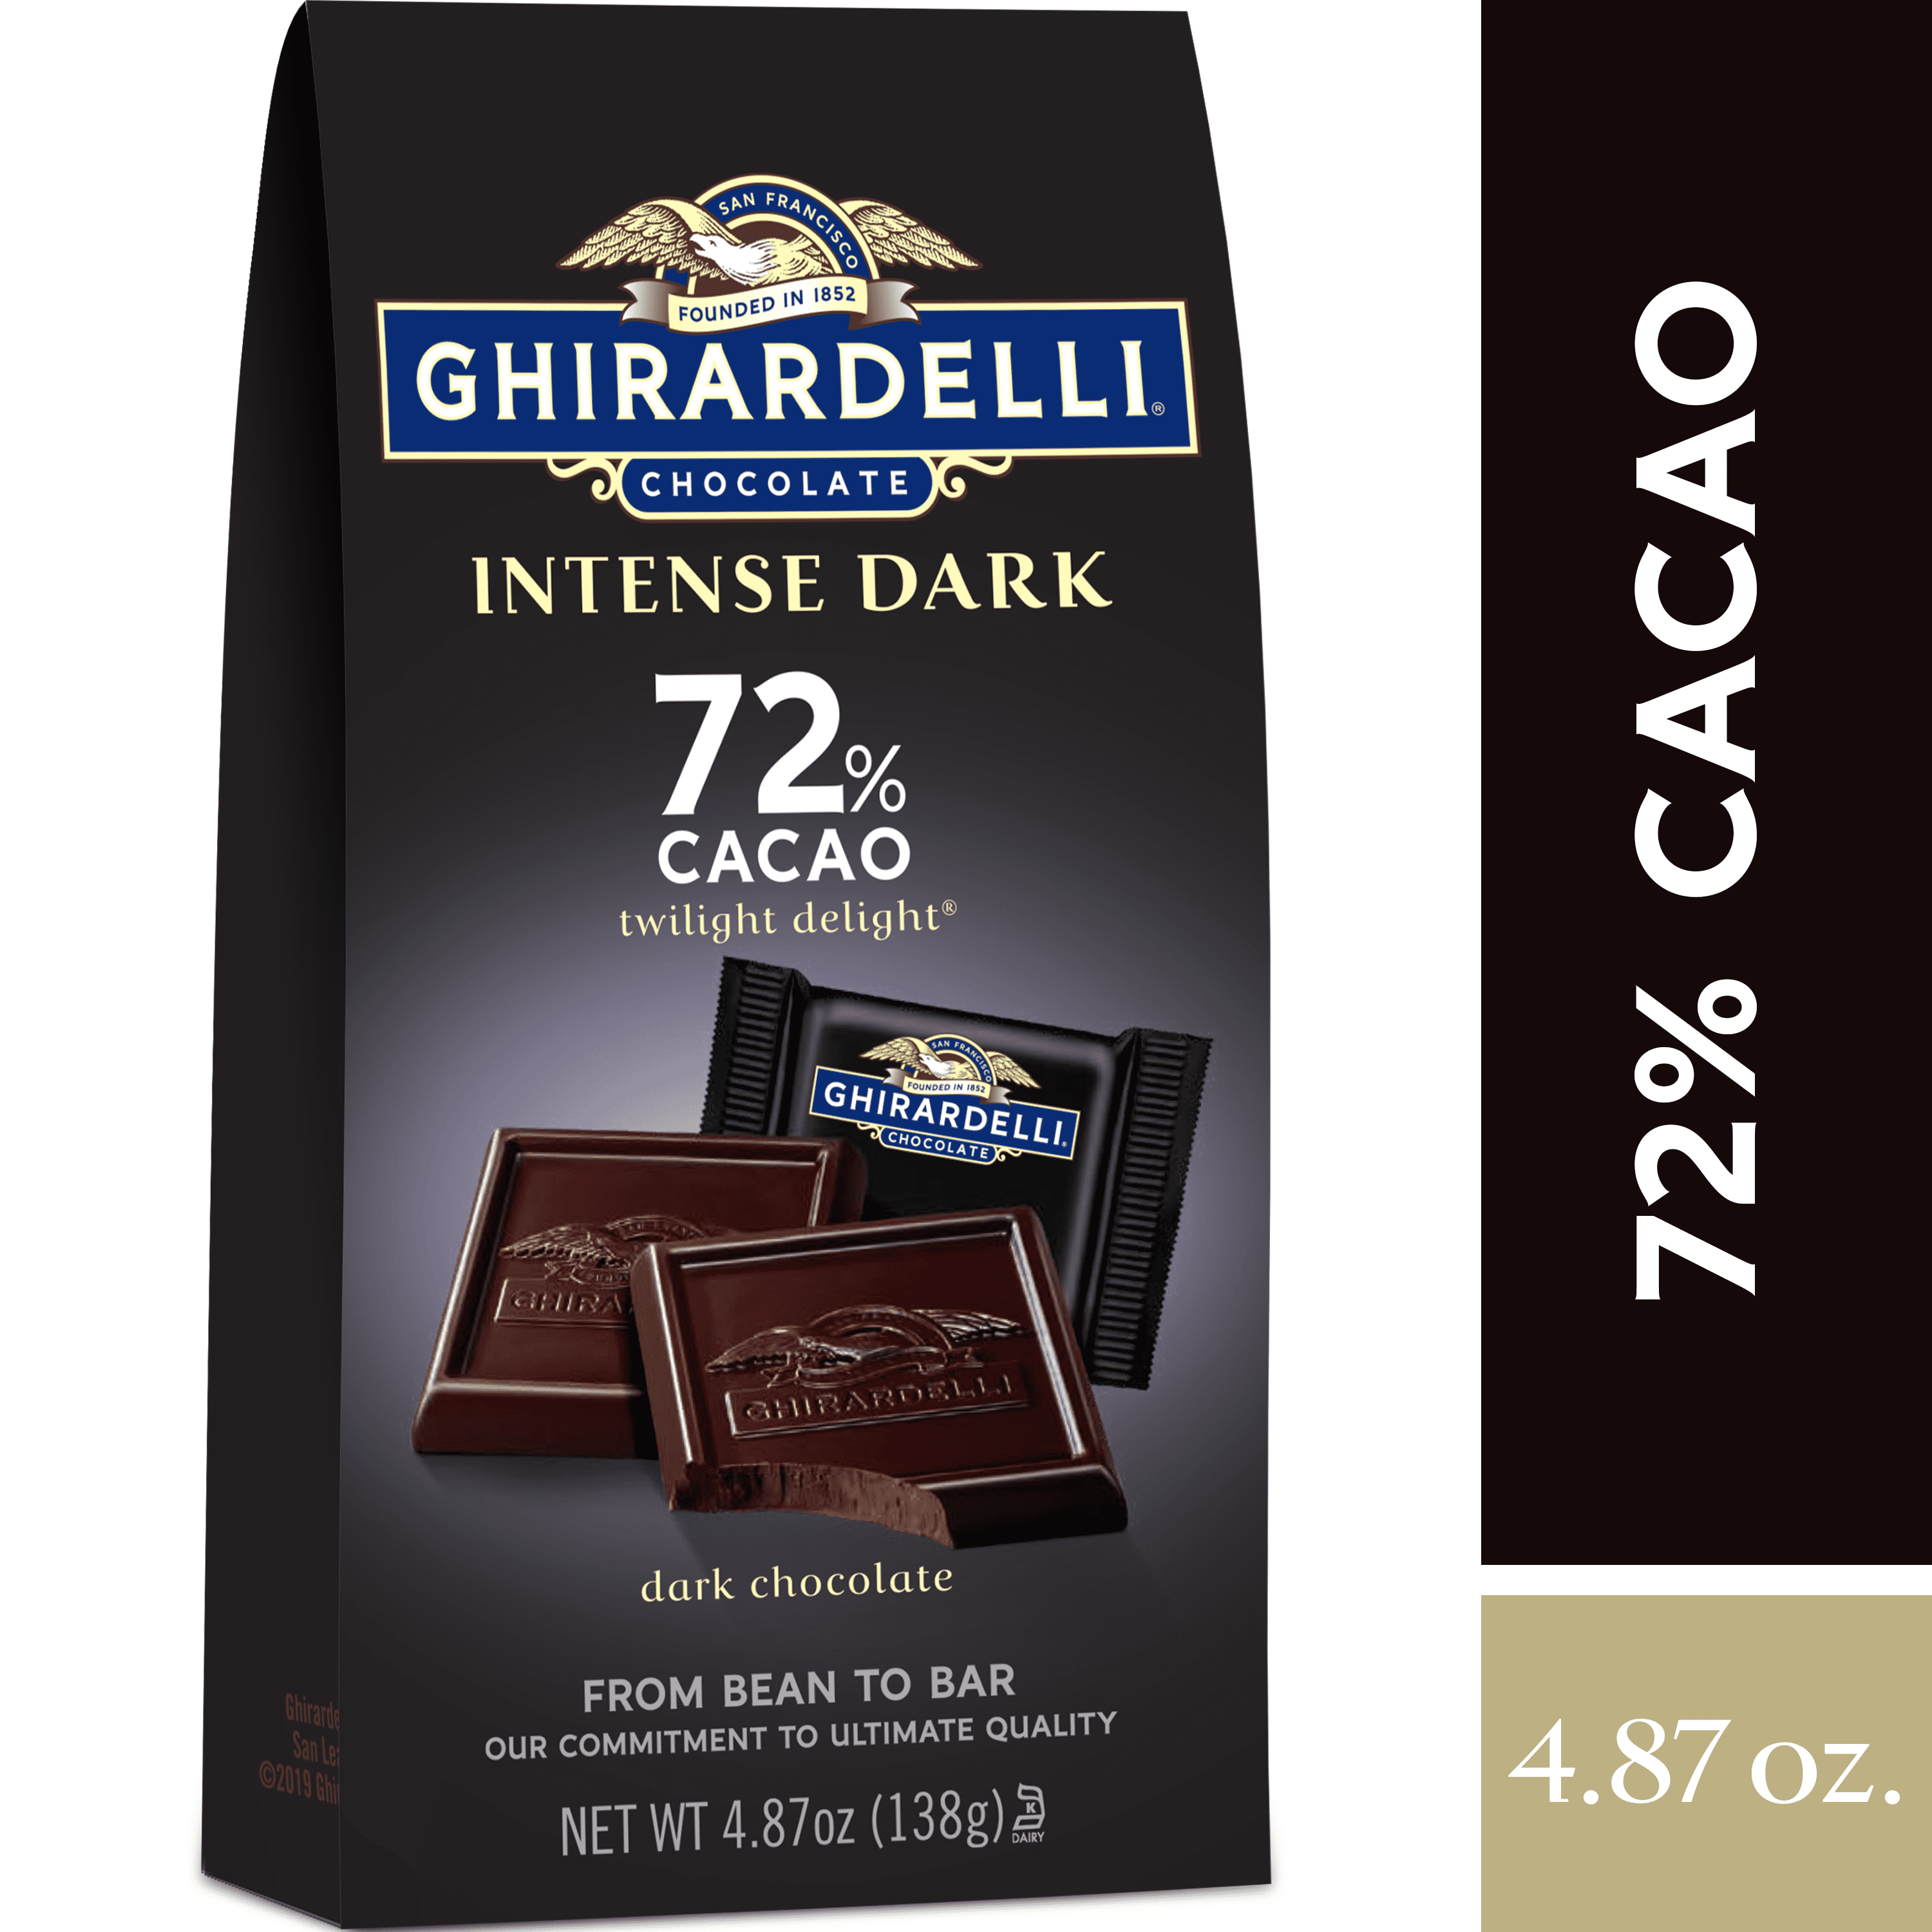  Ghirardelli Intense Dark 72% Cacao Twilight Delight Chocolate  Bar, 3.5 Ounce (Pack of 12) : Grocery & Gourmet Food